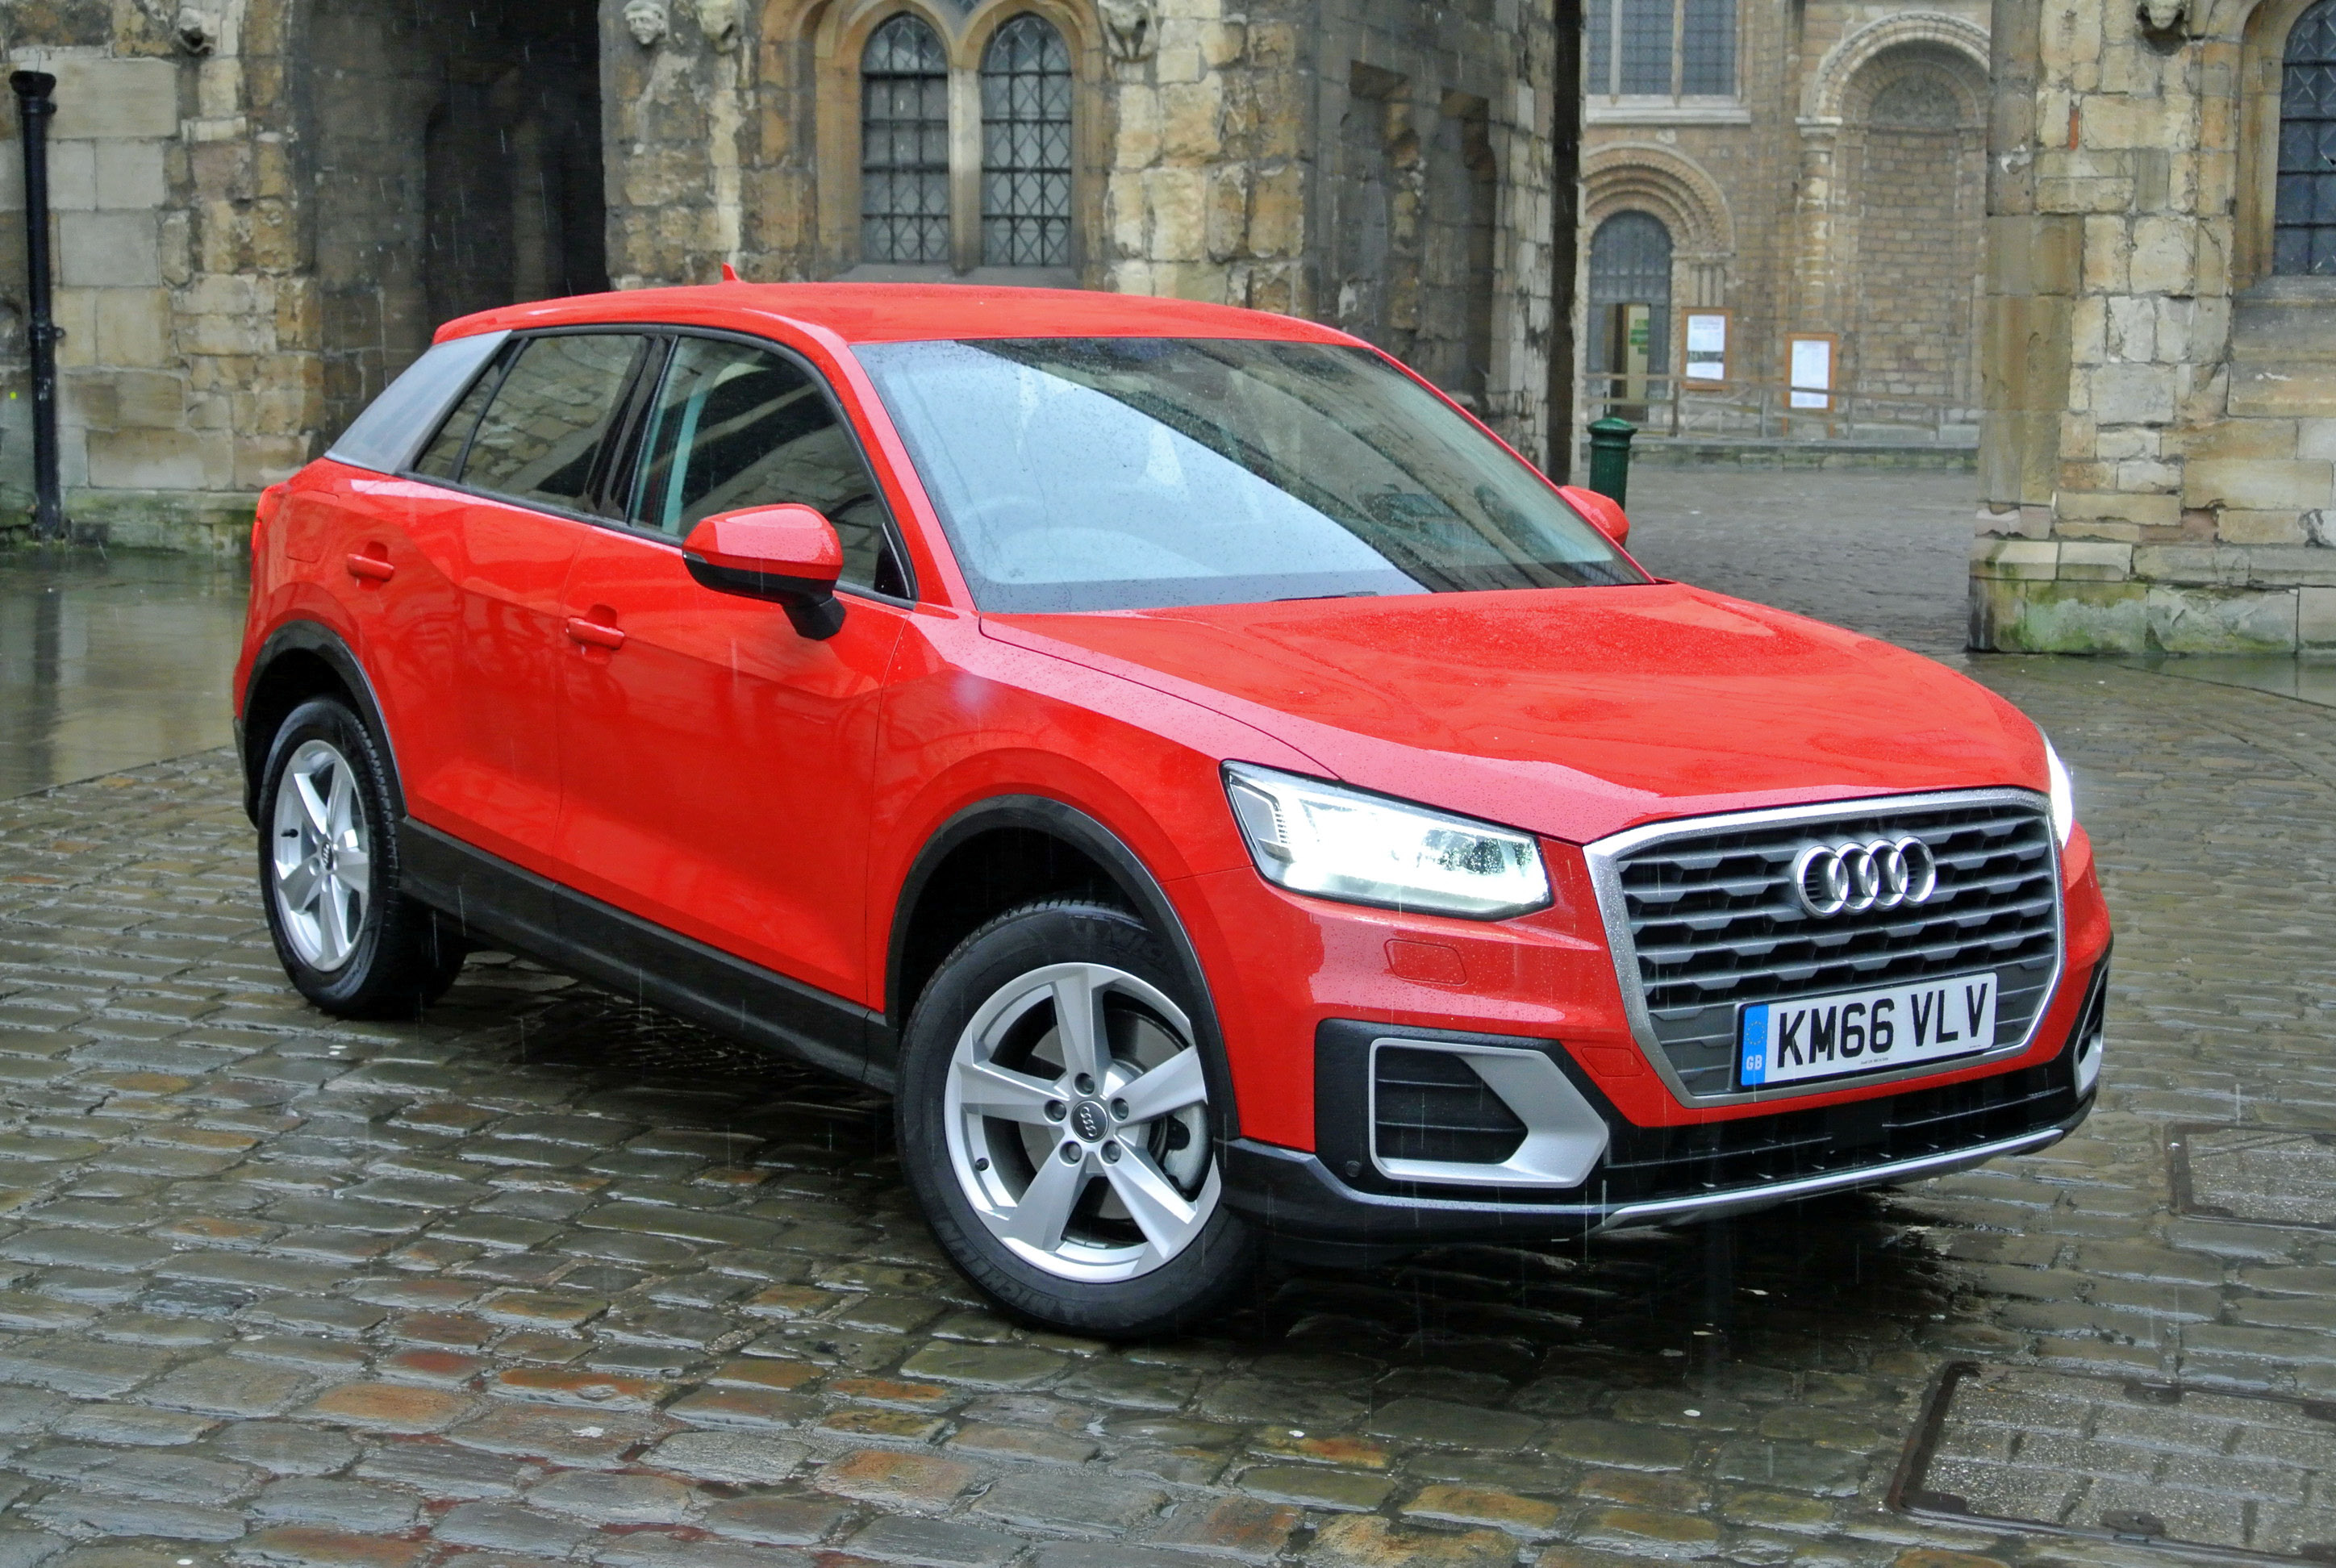 Remove 4WD and add two blades might take an Audi Q2 to the ice-rink